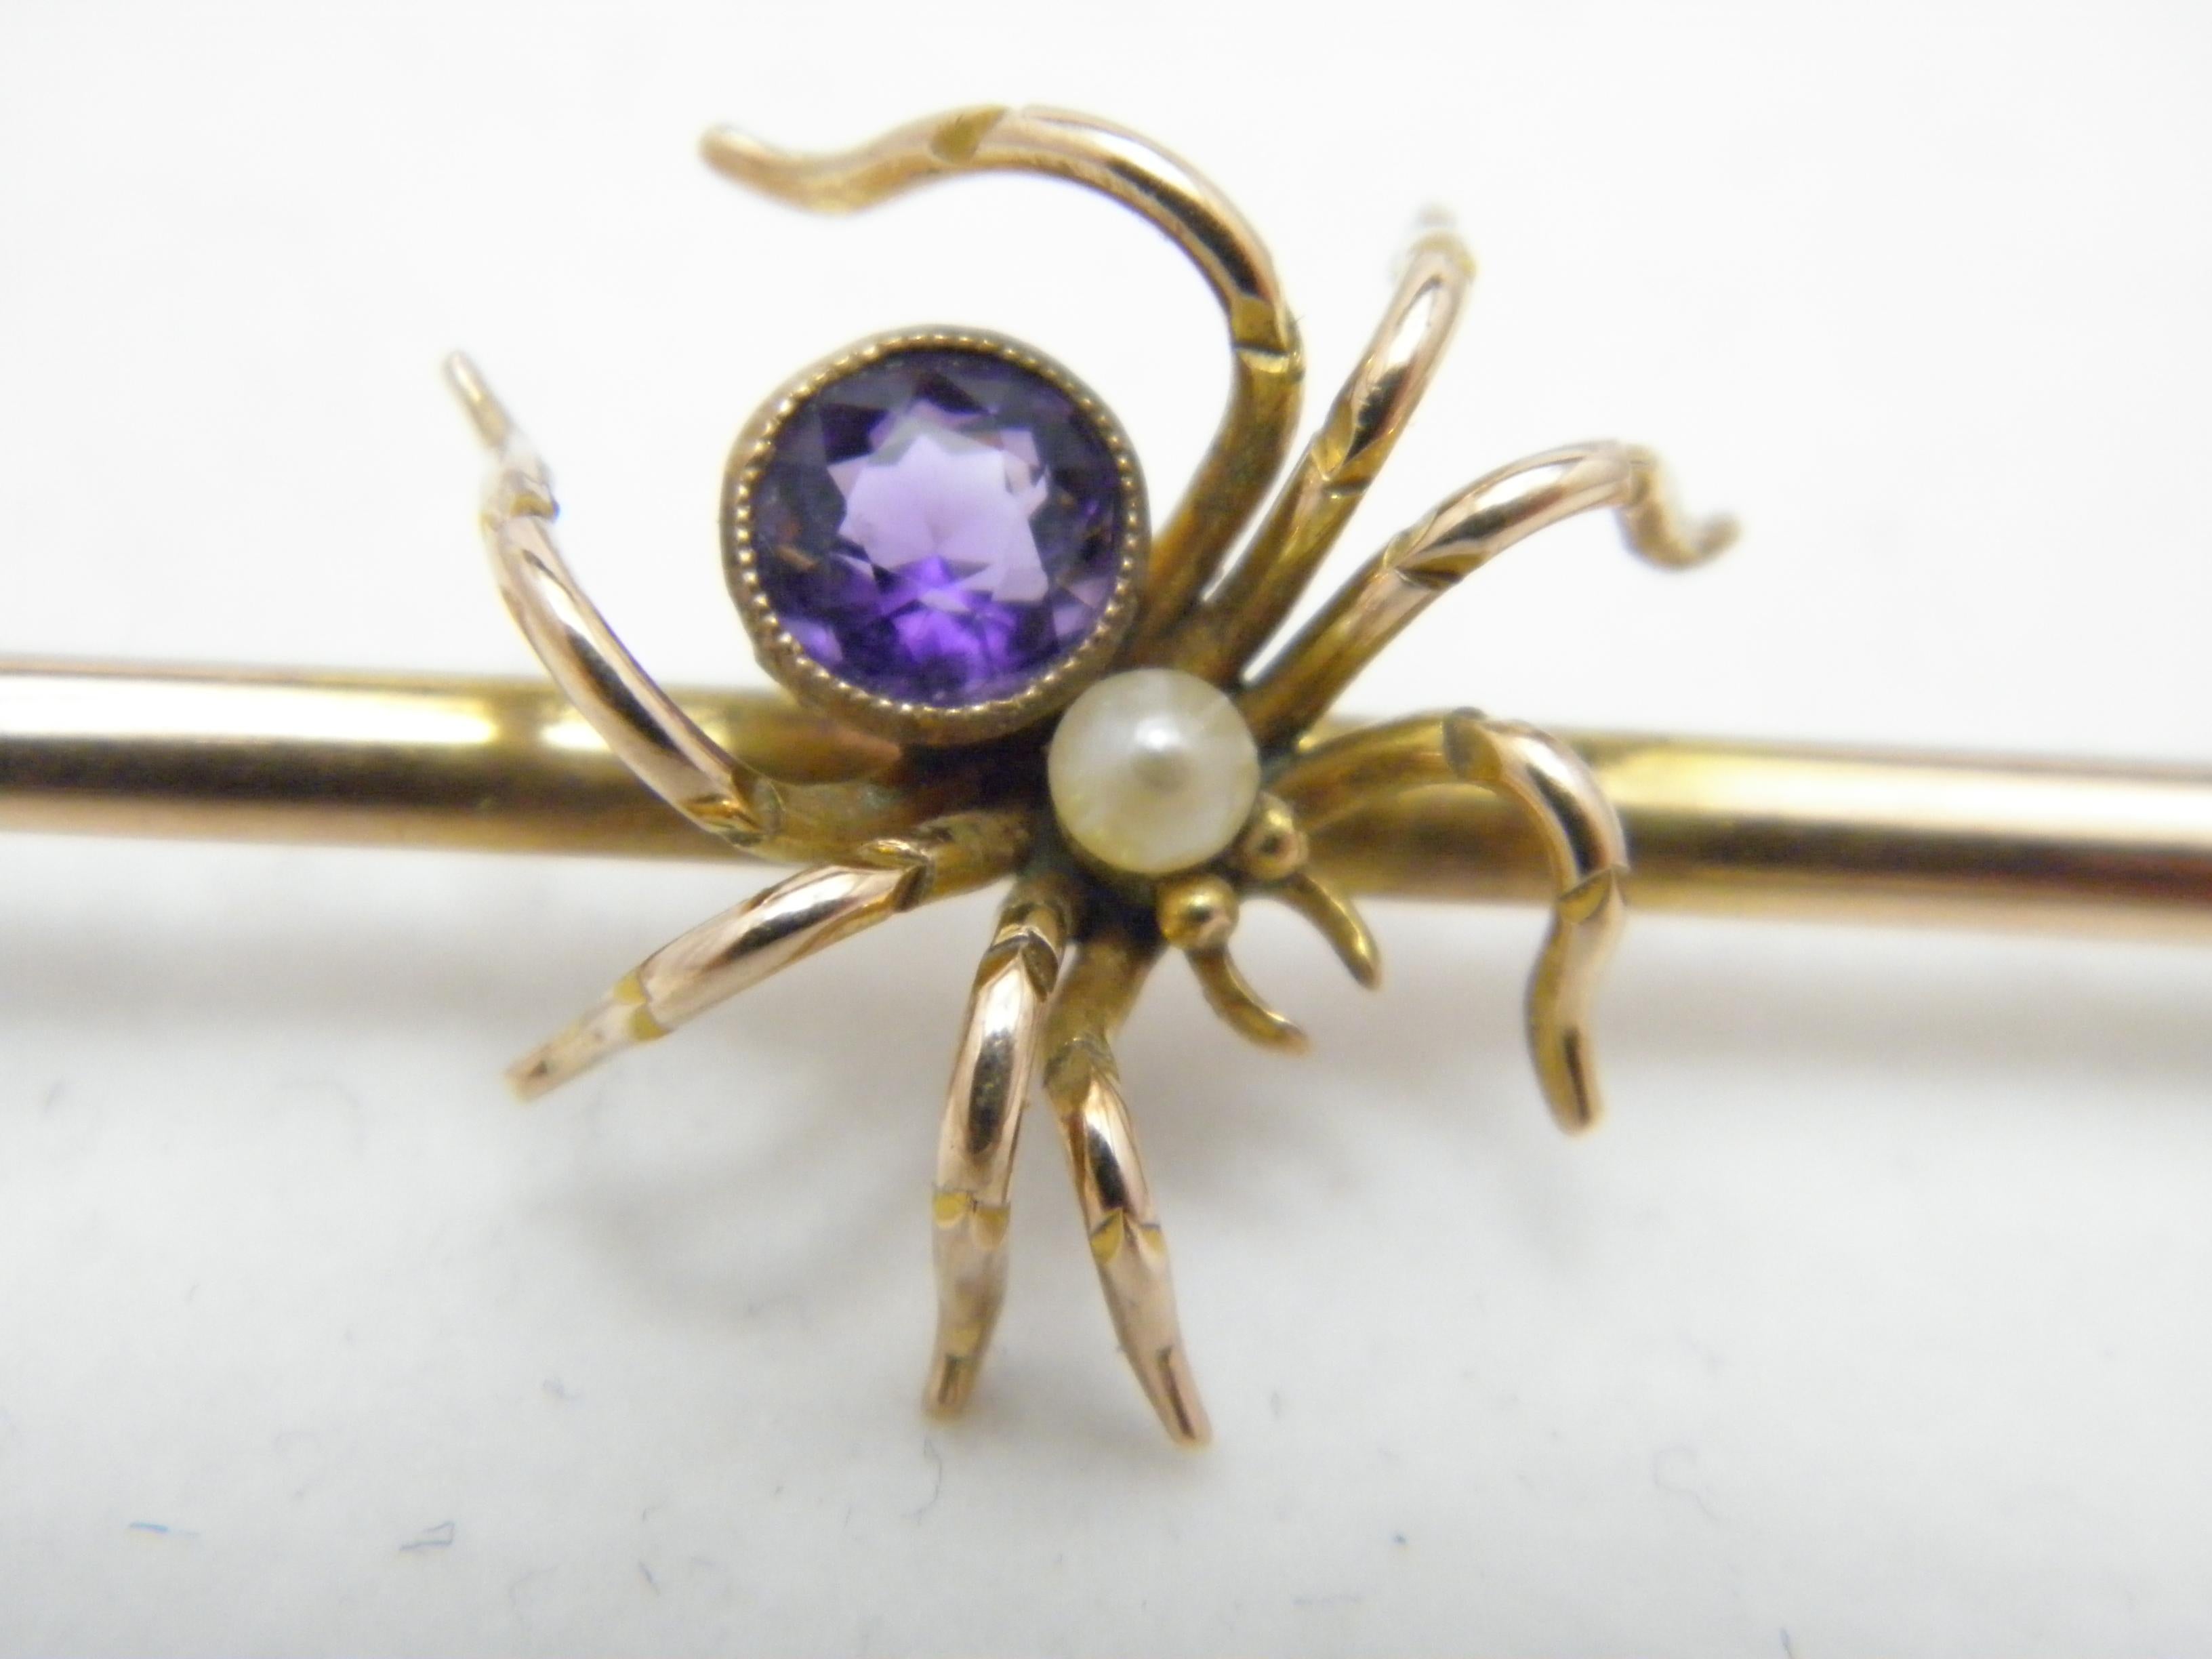 Antique 9ct Gold Large Amethyst Pearl Spider Bug Brooch Pin c1860 Heavy 6.4g 375 In Good Condition For Sale In Camelford, GB